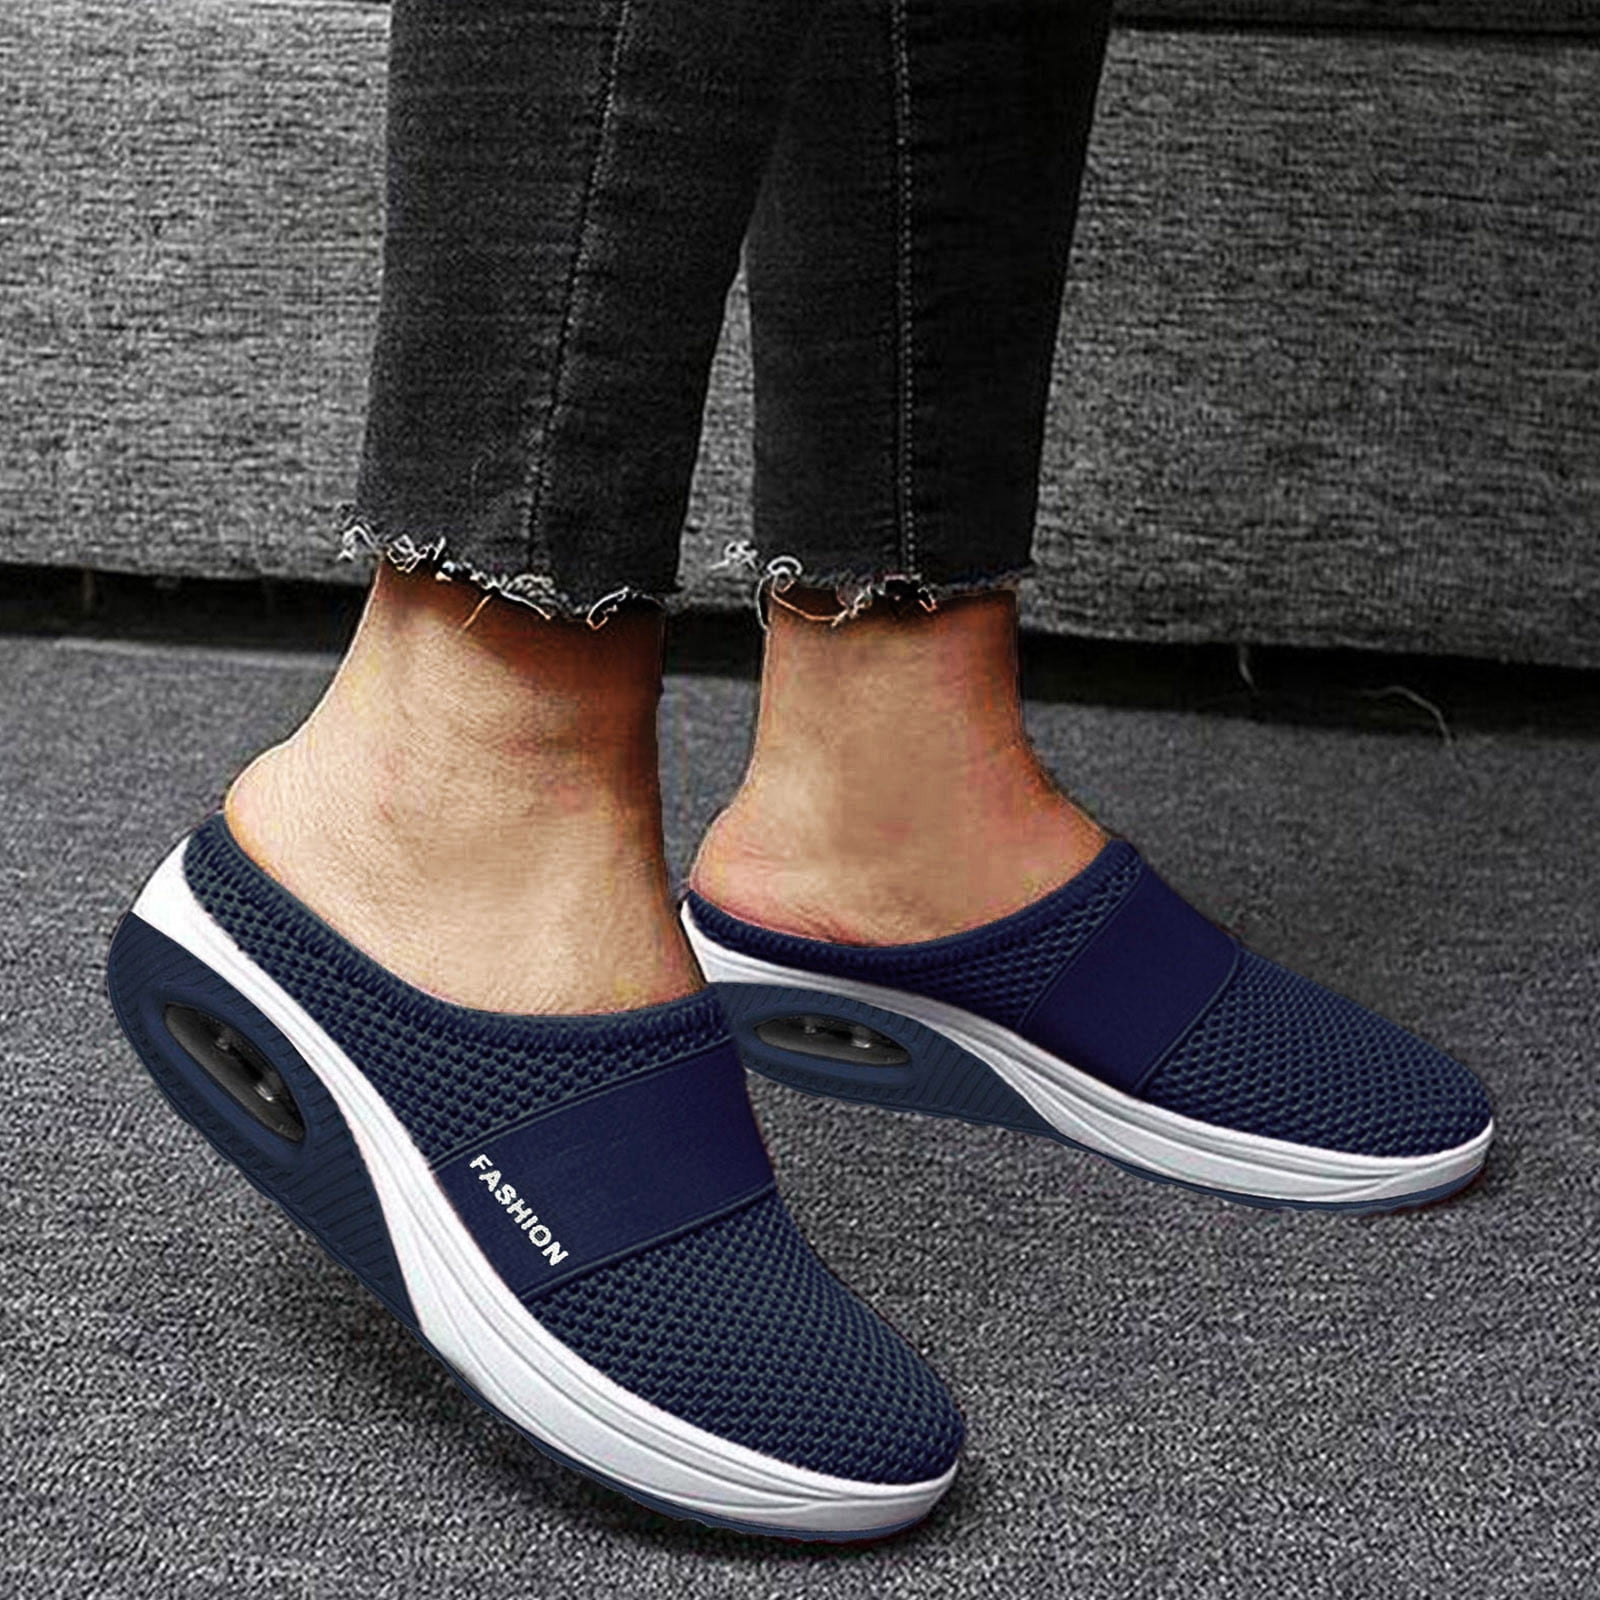 Women Shoes Air Cushion Slip On Orthopedic Walking Shoes With Arch ...